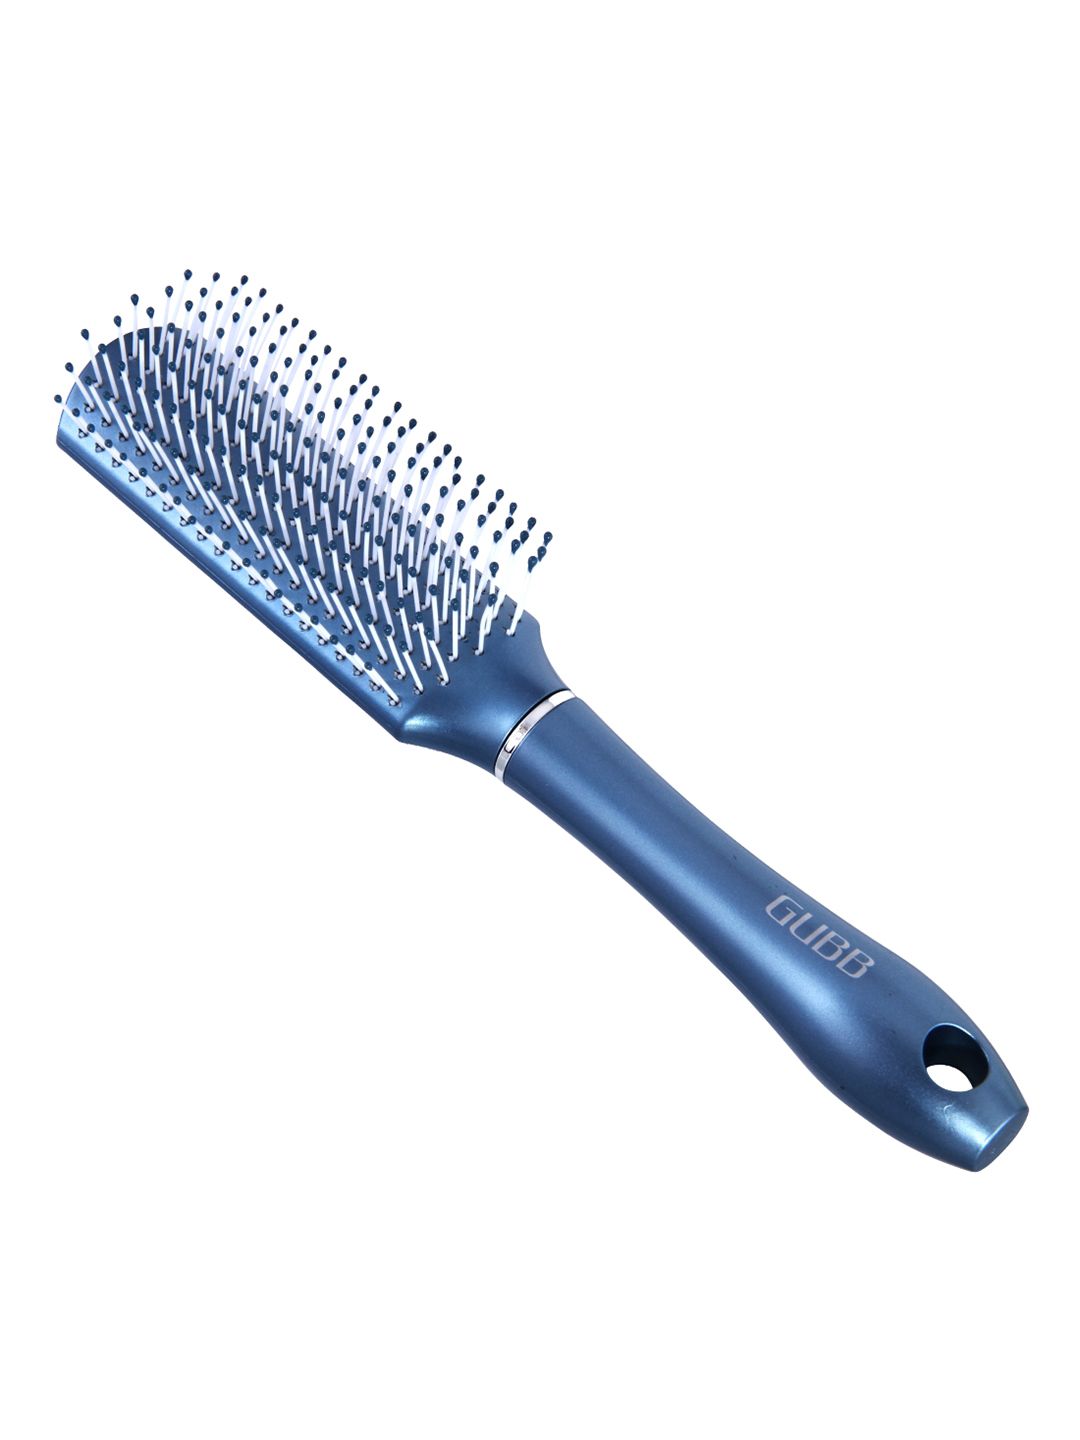 GUBB Blue Styling & Smoothing Hair Brush Comb Price in India